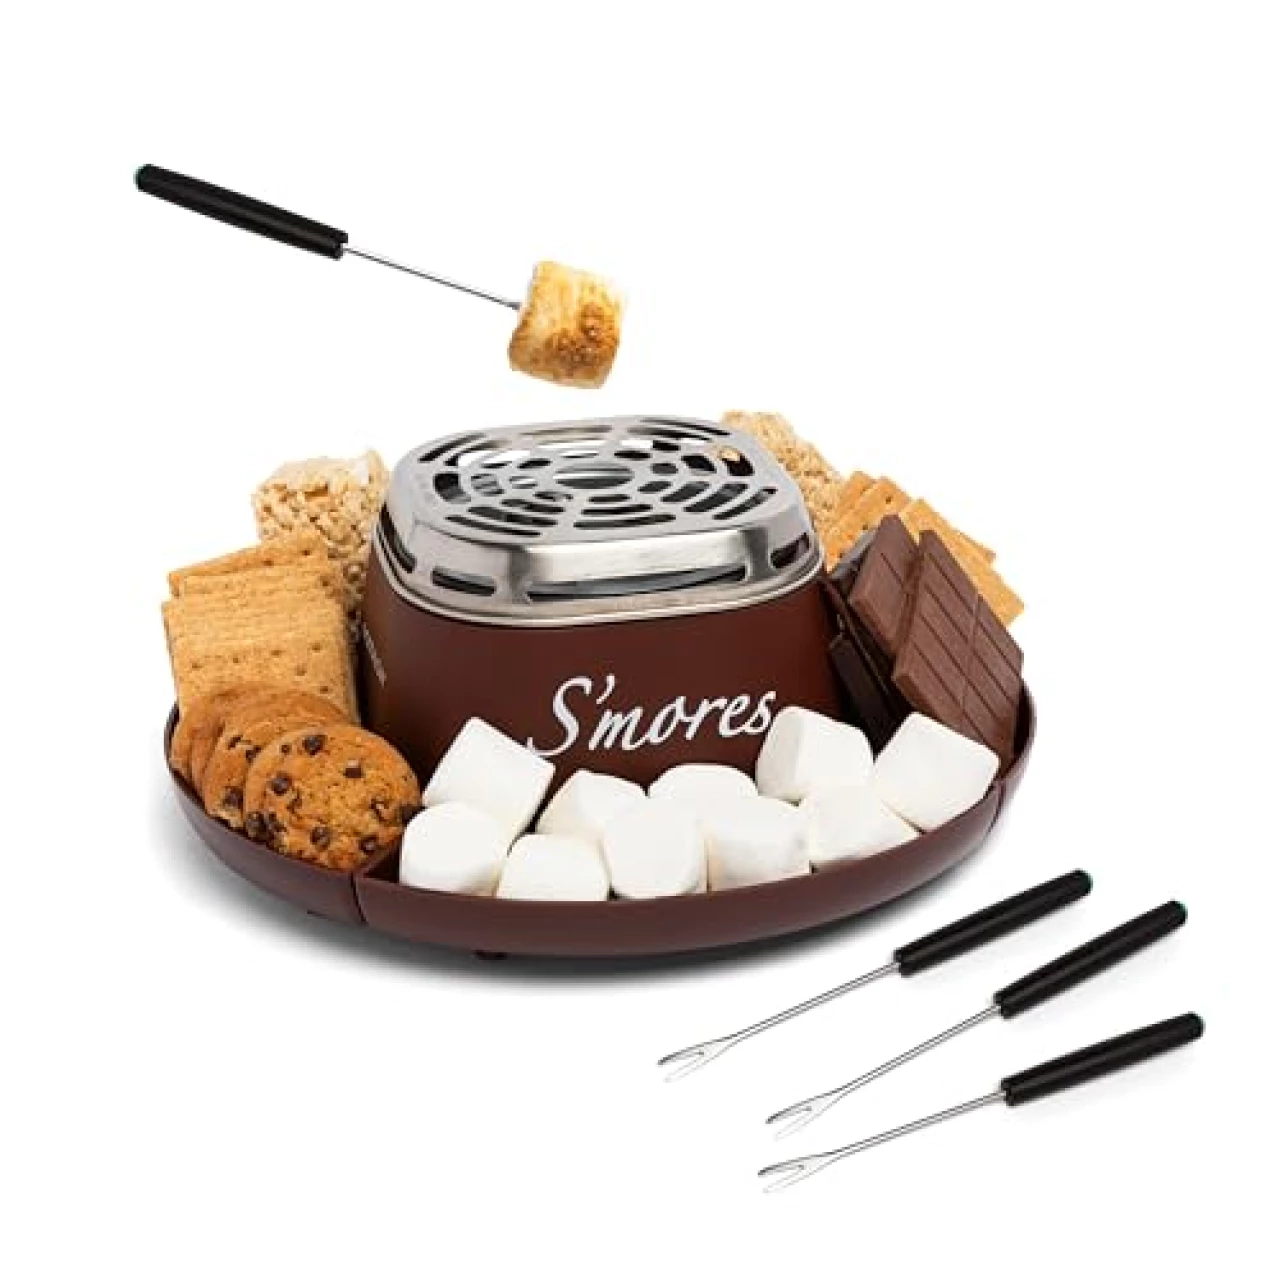 Nostalgia Tabletop Indoor Electric S&rsquo;mores Maker - Smores Kit With Marshmallow Roasting Sticks and 4 Trays